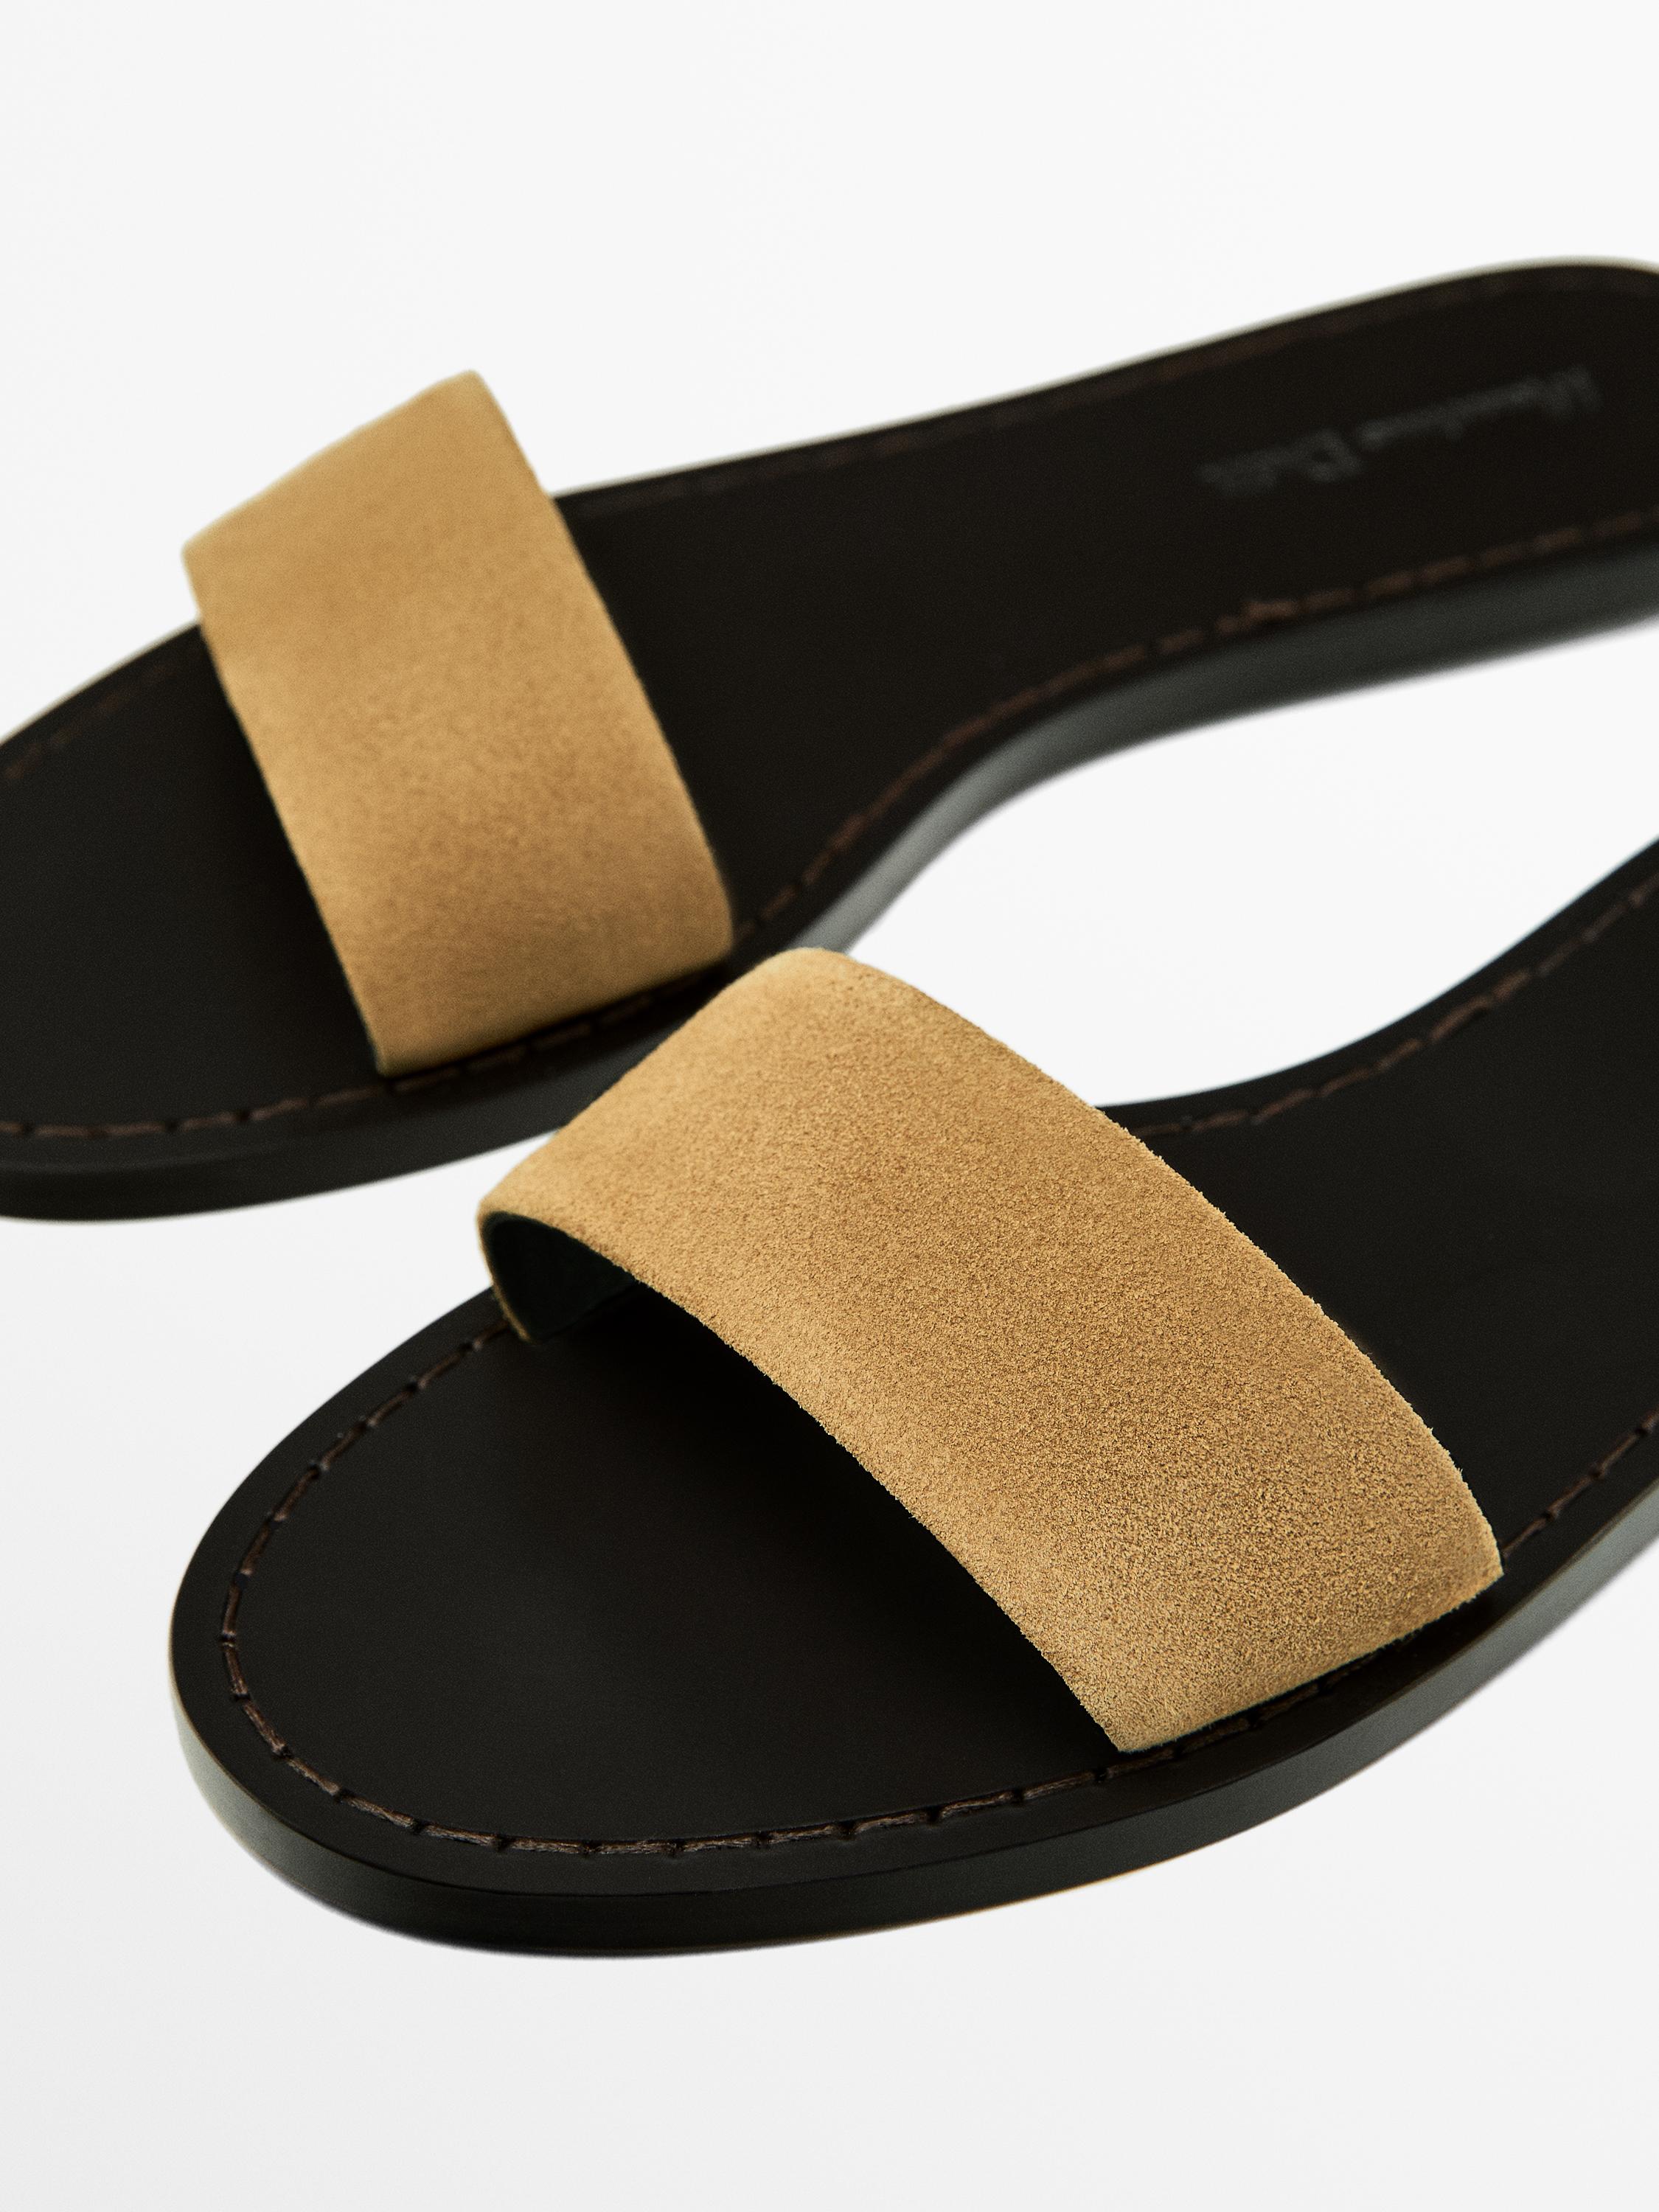 Slider sandals with split leather strap - taupe brown | ZARA Canada